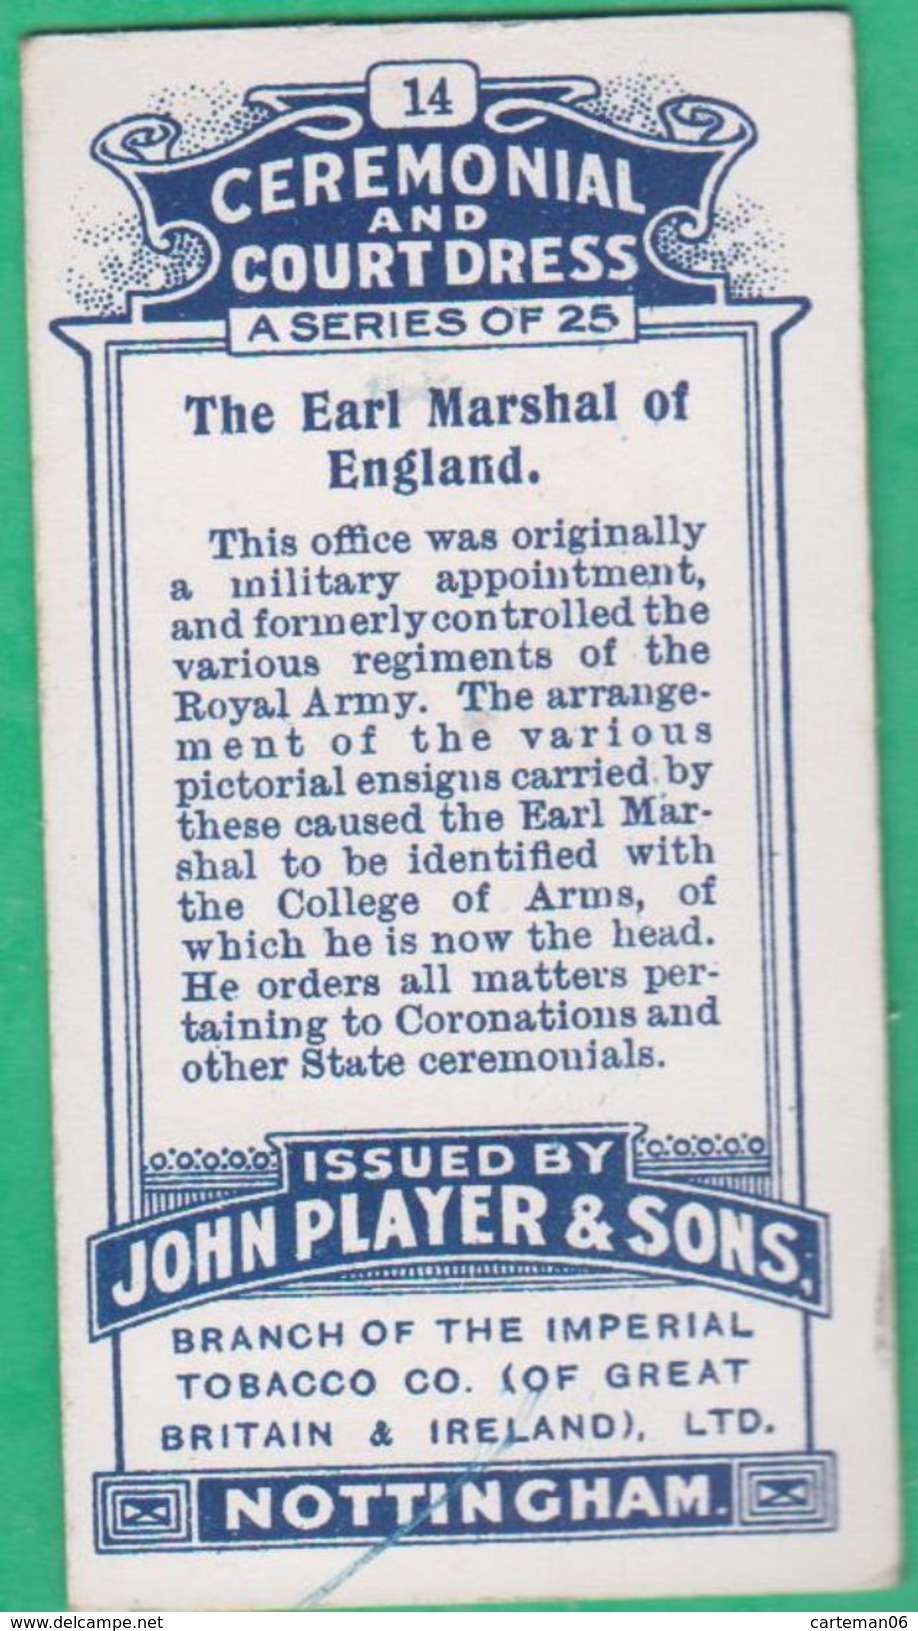 Chromo John Player & Sons, Player's Cigarettes, Ceremonial And Court Dress - The Earl Marshal Of England N°14 - Player's